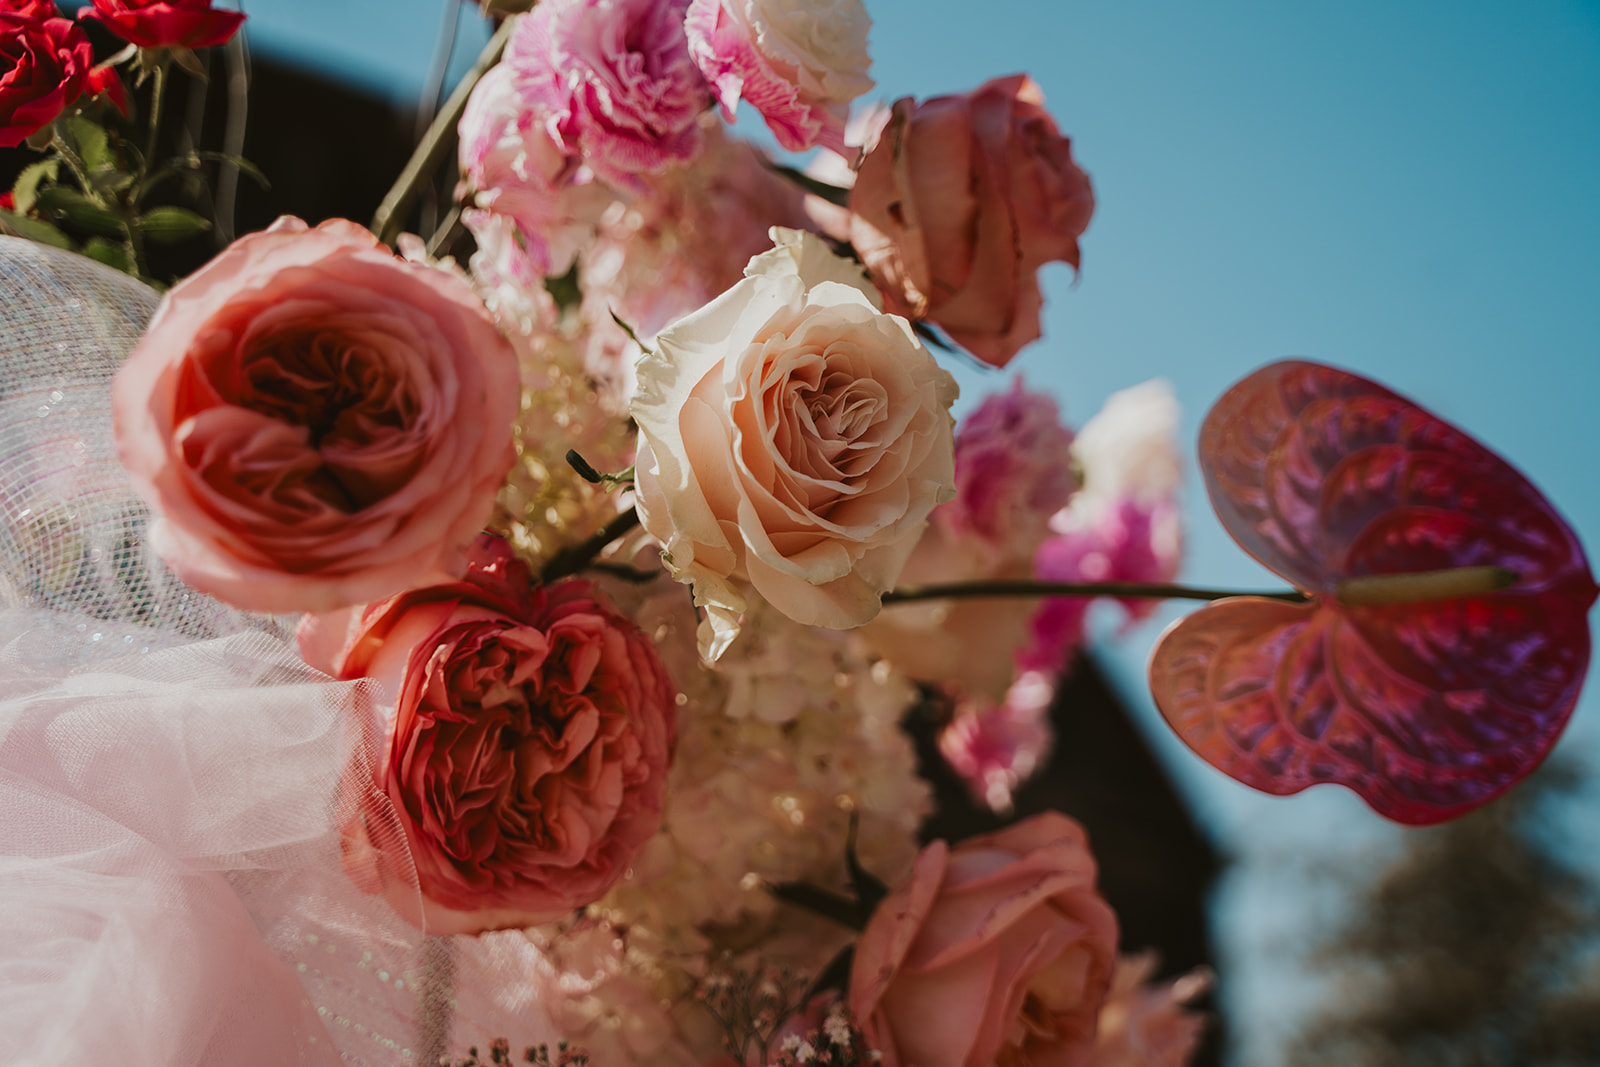 Flower details at wedding altar in Livermore, California wine country